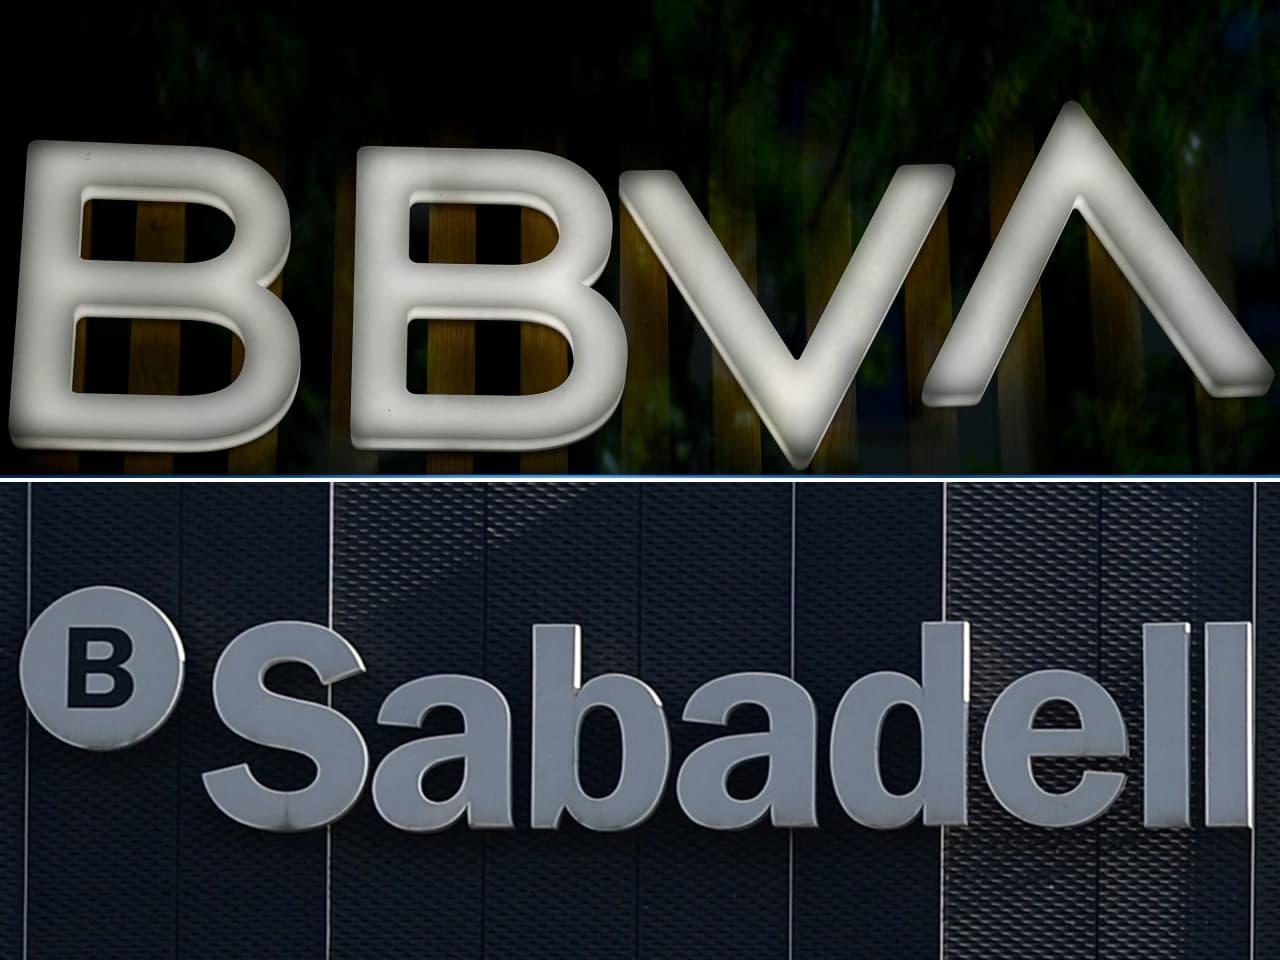 Here’s why BBVA just launched a hostile bid for Sabadell